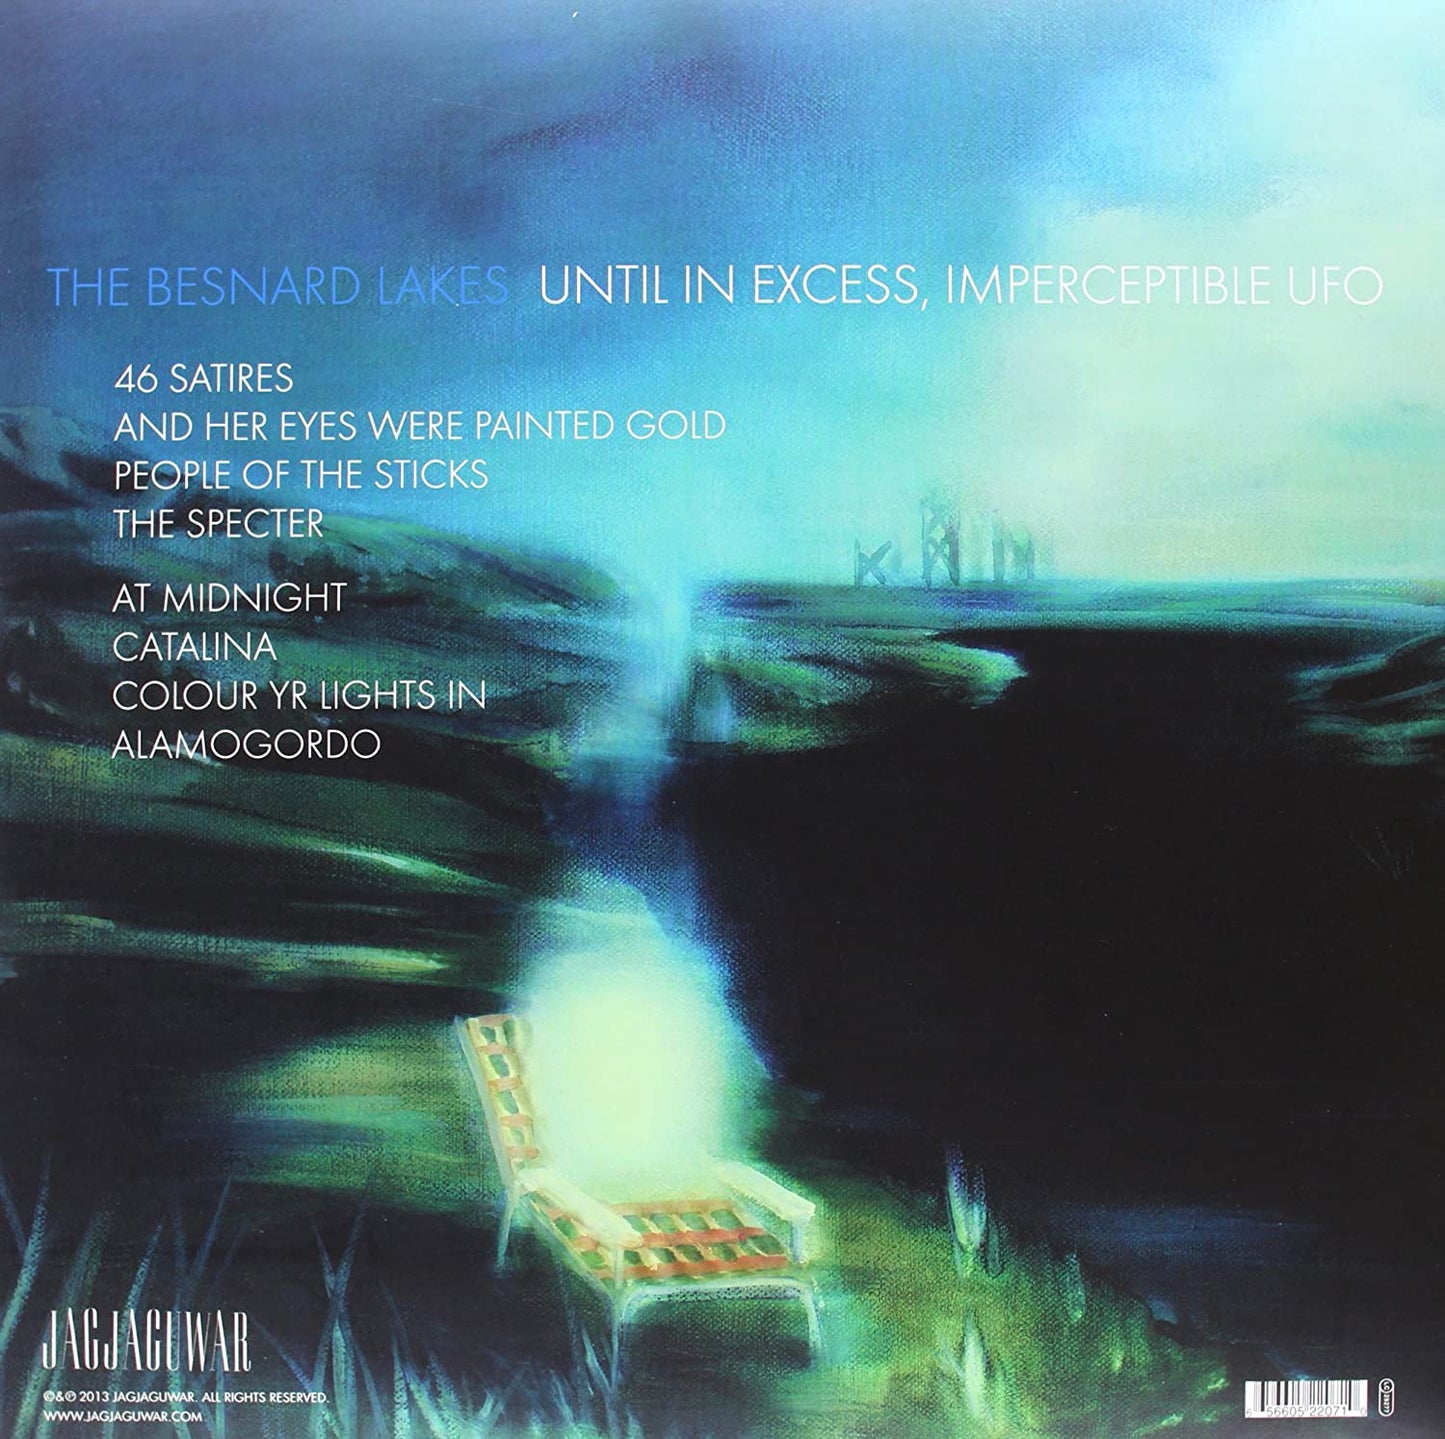 Besnard Lakes/Until In Excess, Imperceptible UFO [LP]